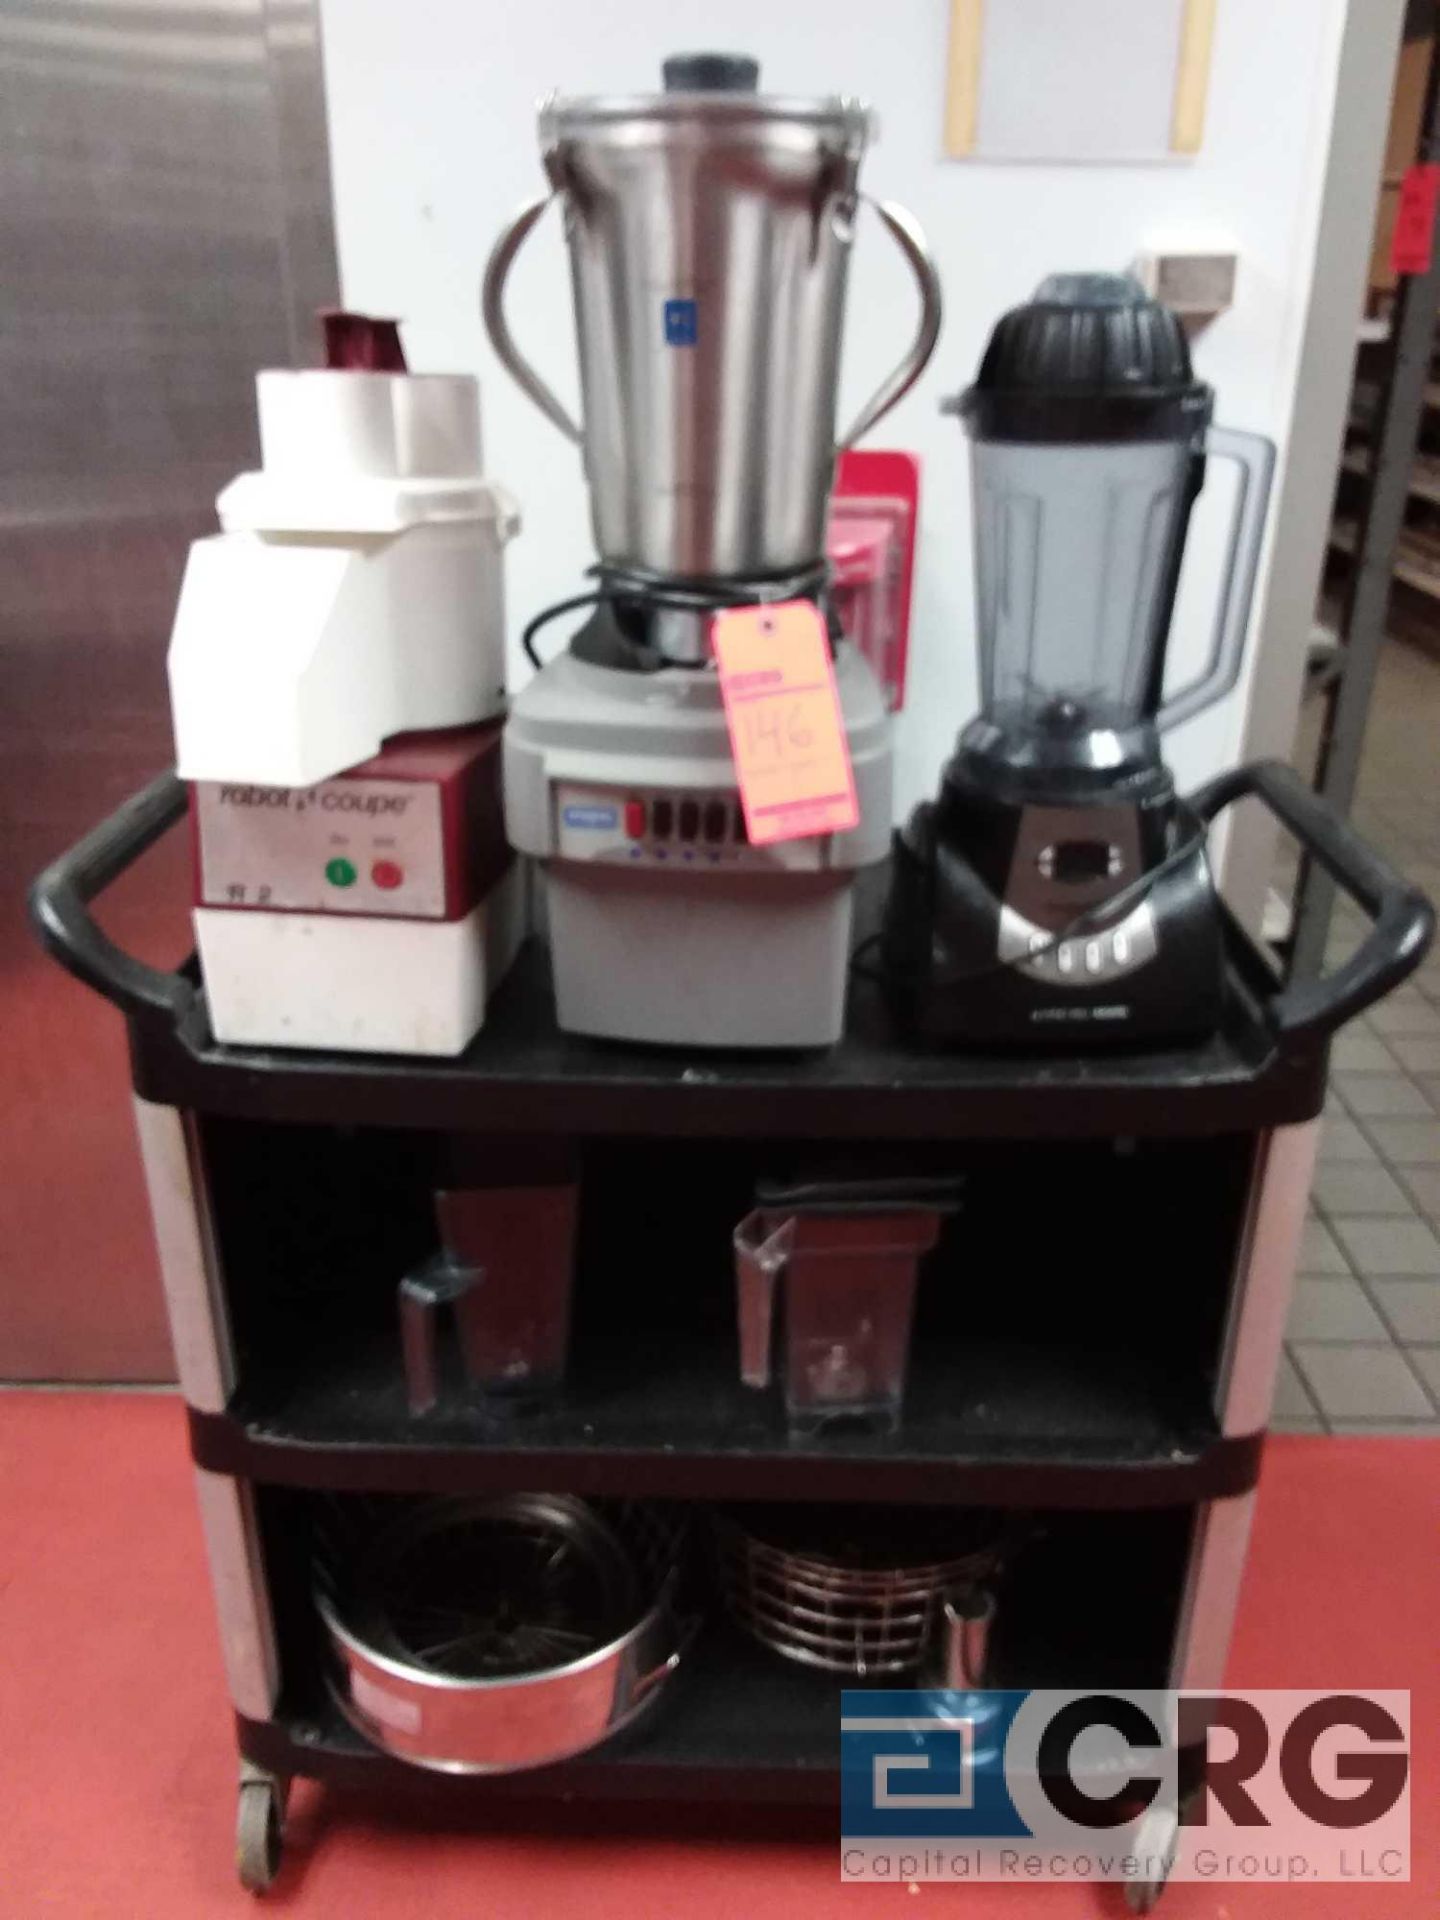 Lot - includes Montel Commercial Blender, a Waring Commercial Blender, and a Robot Coupe juicer,